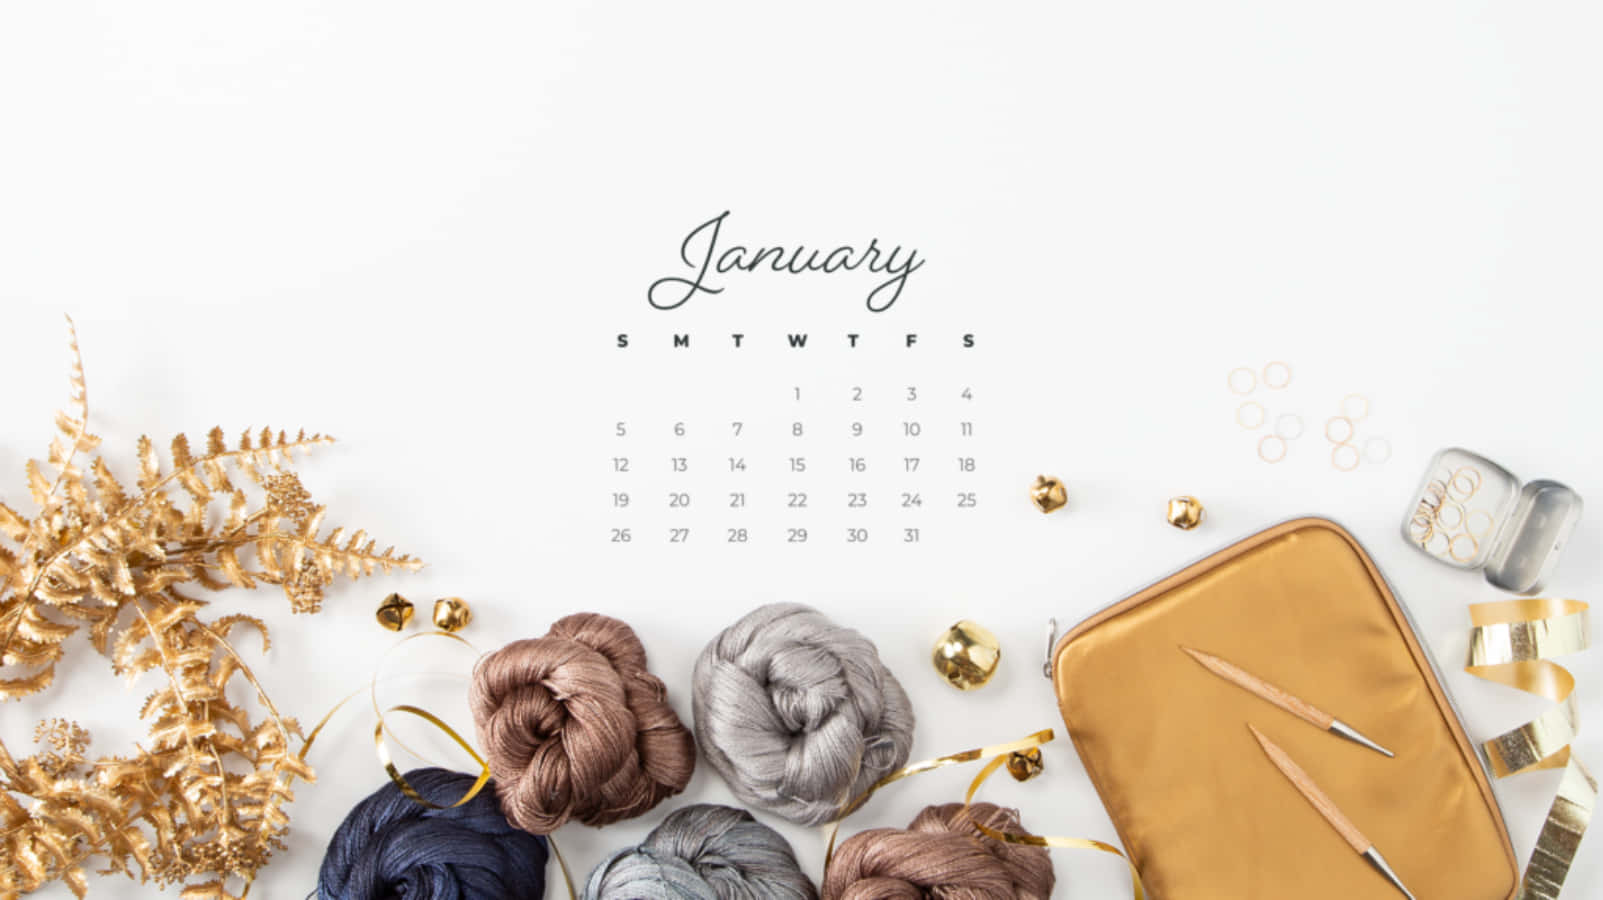 January 2019 Calendar With Knitting Supplies And Yarn Wallpaper